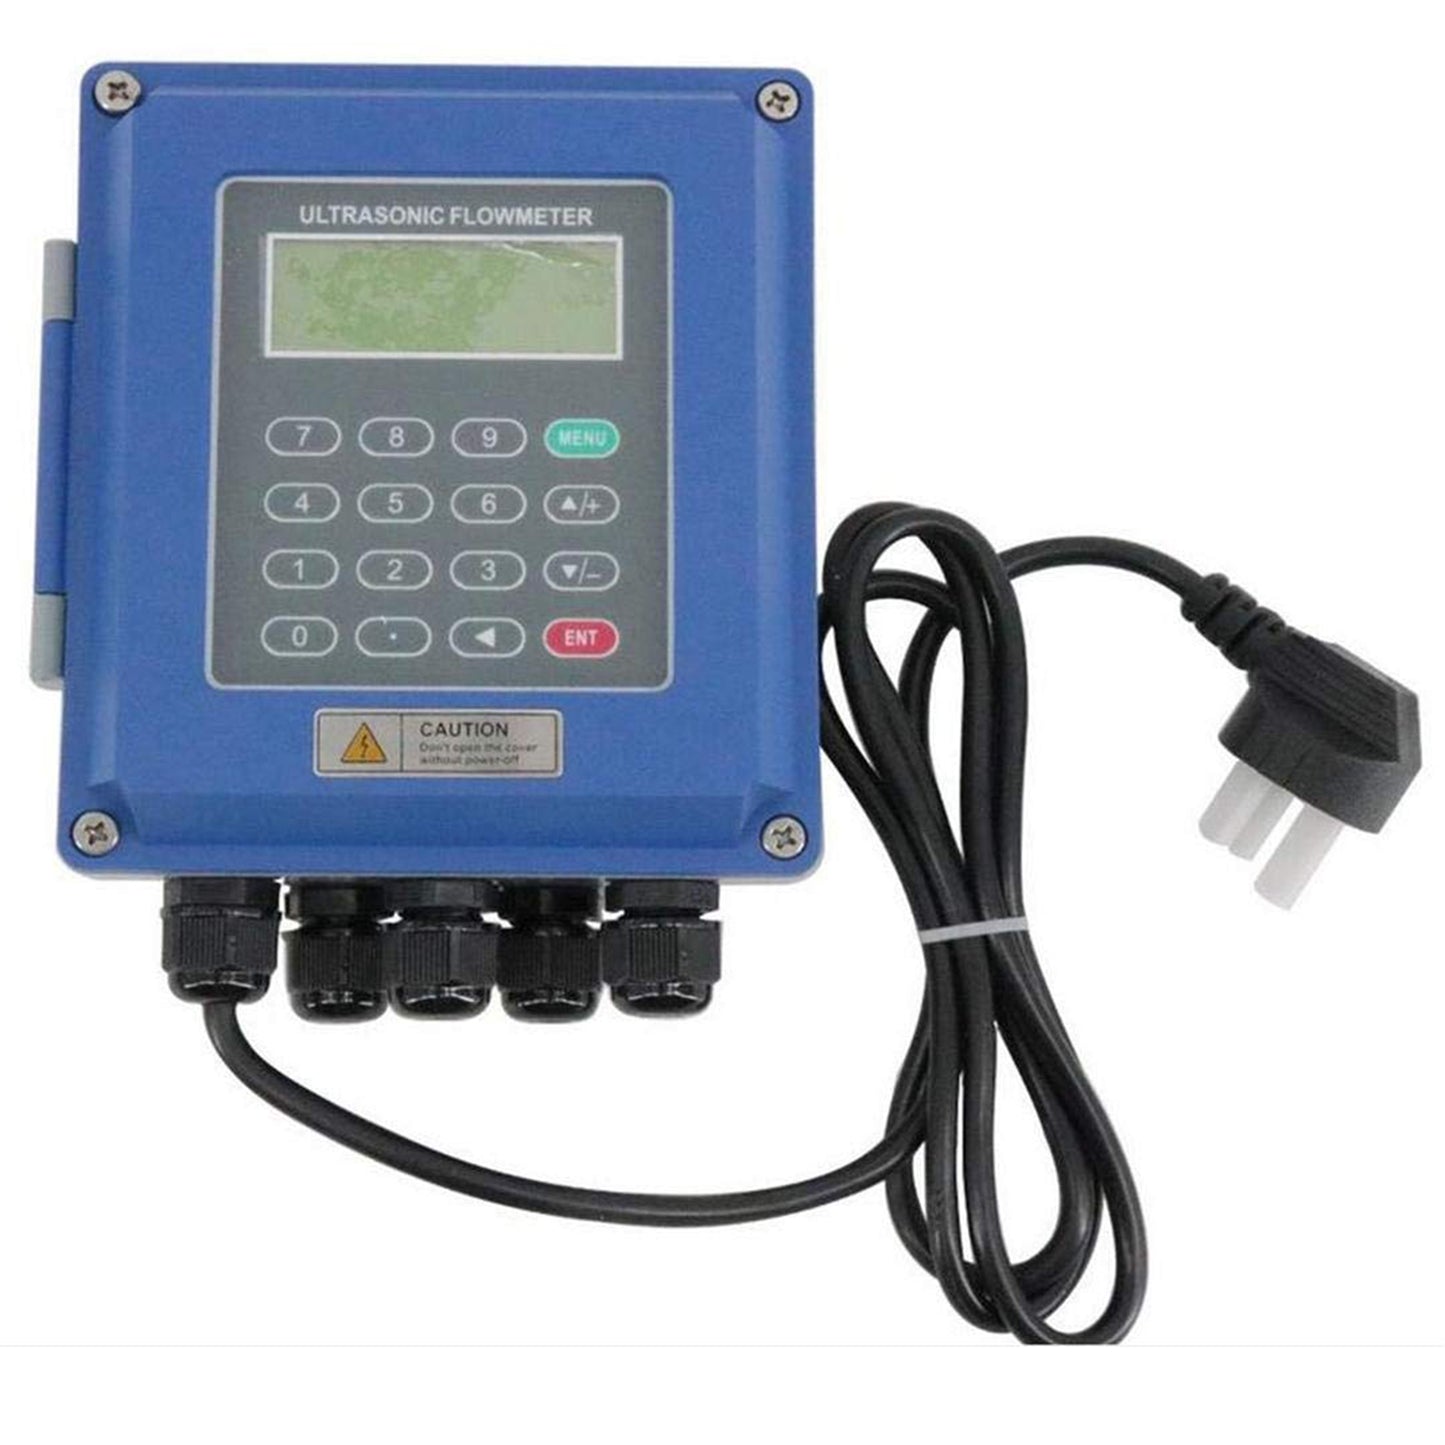 VTSYIQI Ultrasonic Flow Meter Liquid Flowmeter With DN300mm to DN6000mm Wall Mounted Type RS485 Interface IP67 Protection TL-1 Transducer